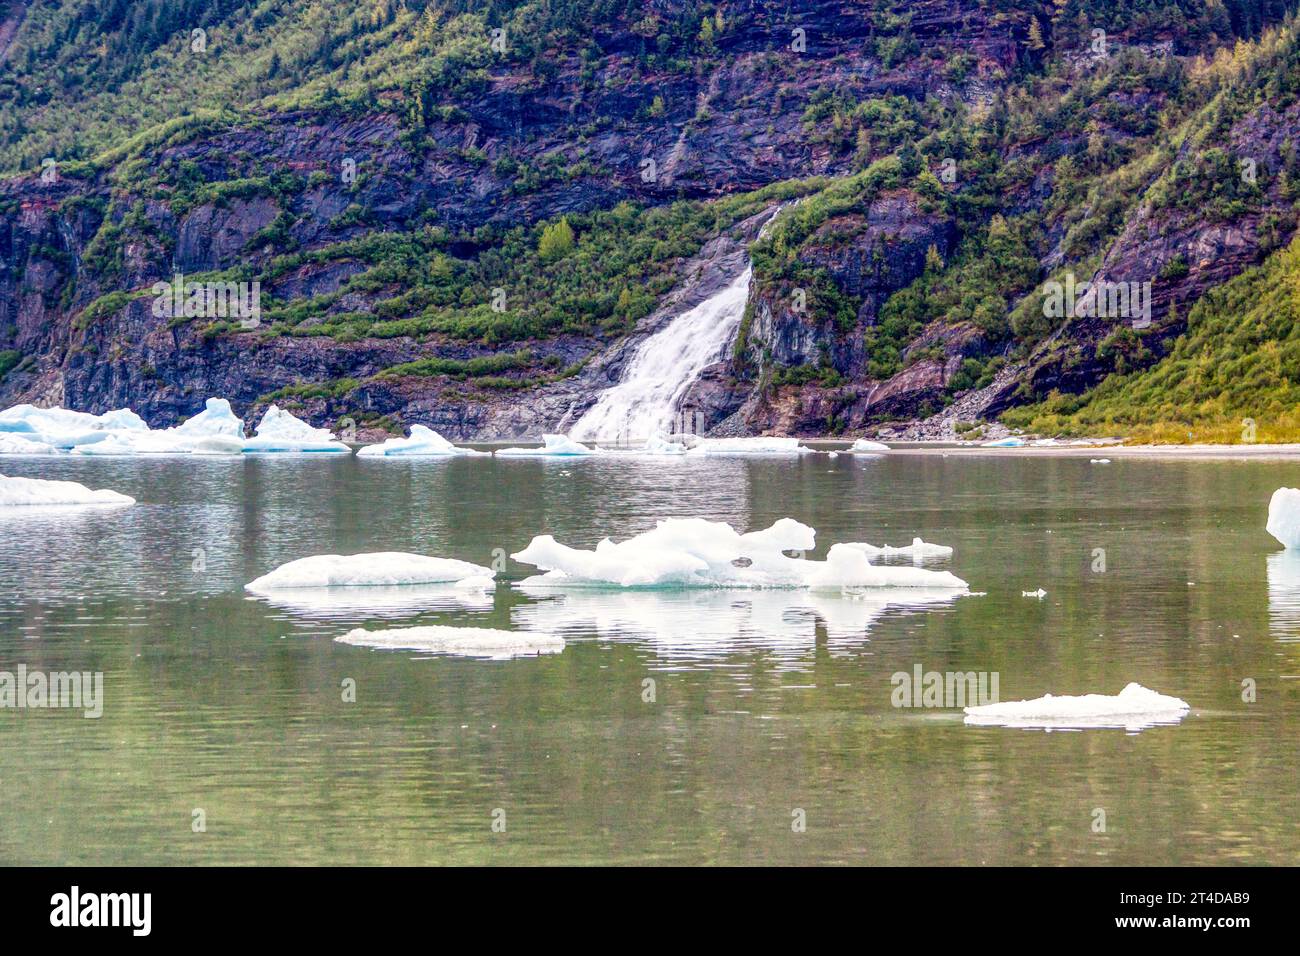 Mendenhall Glacier is about a 12 mile long glacier in Mendenhall Valley, about 12 miles  from downtown Juneau. It is a major tourist attraction. Stock Photo